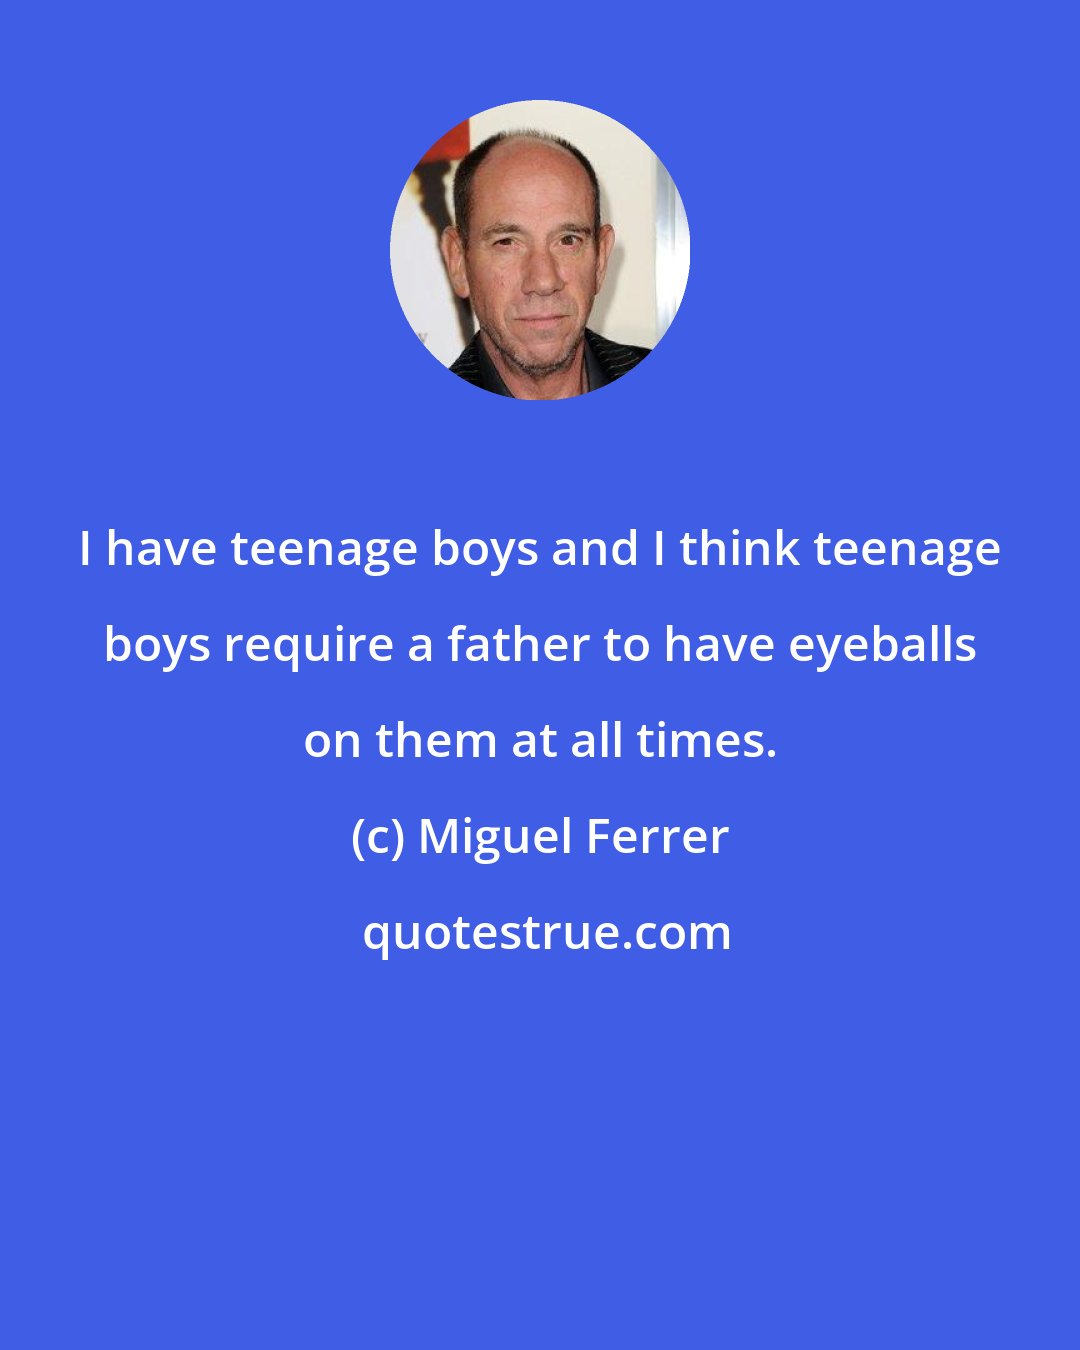 Miguel Ferrer: I have teenage boys and I think teenage boys require a father to have eyeballs on them at all times.